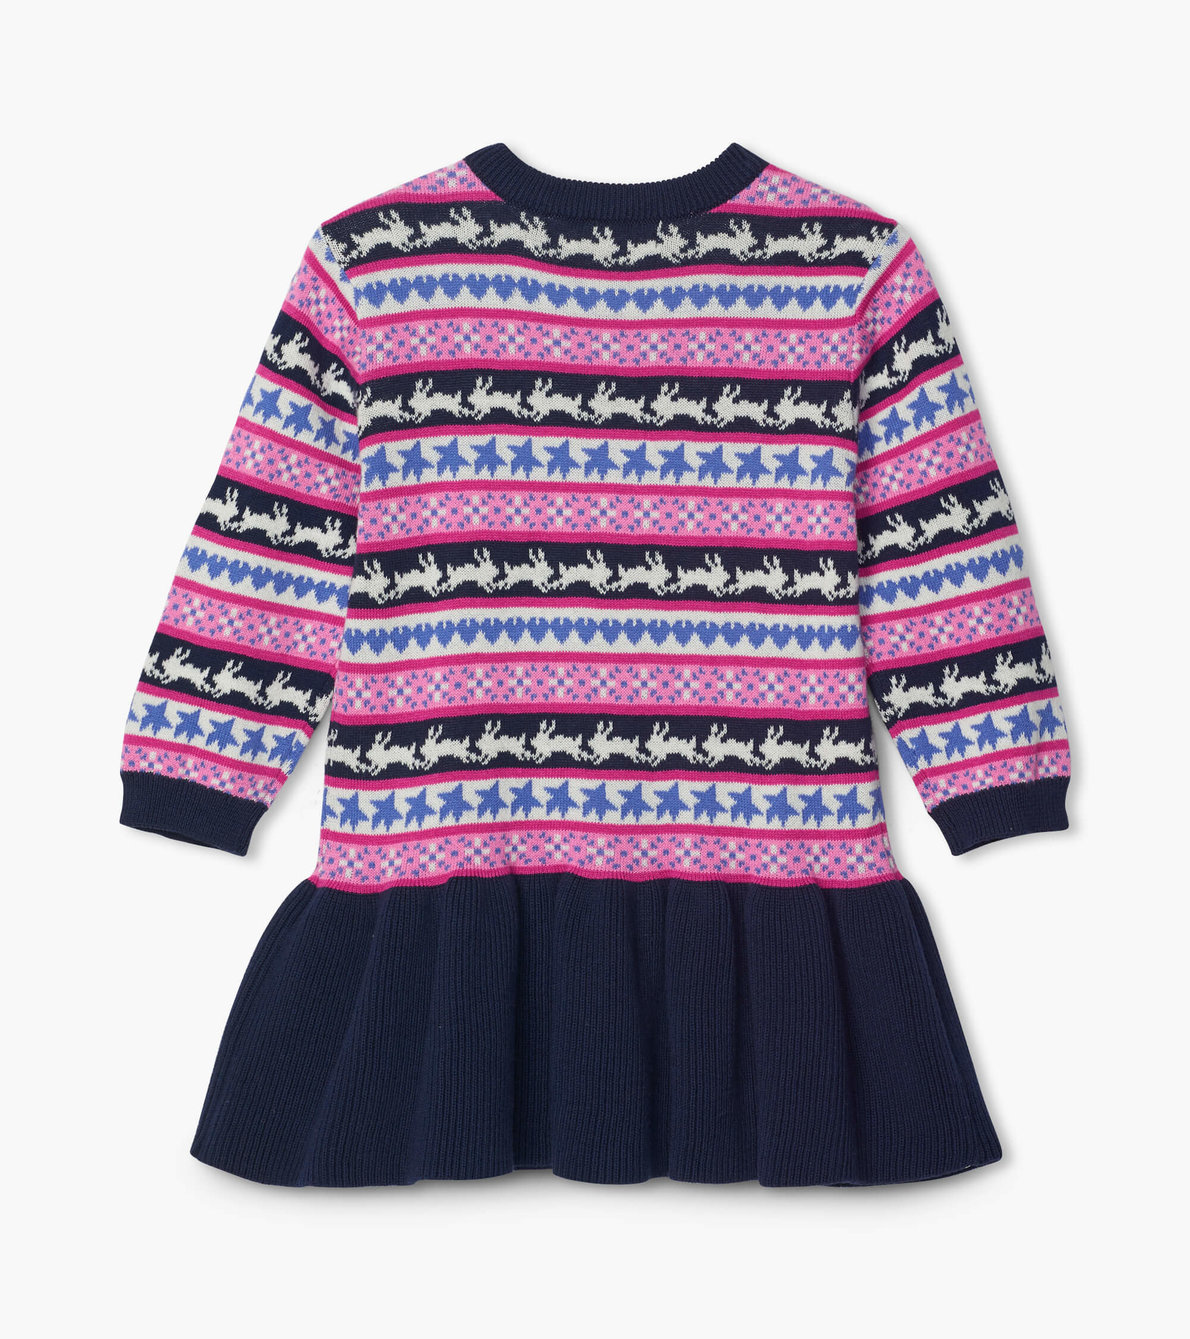 View larger image of Fair Isle Bunnies Baby Sweater Dress